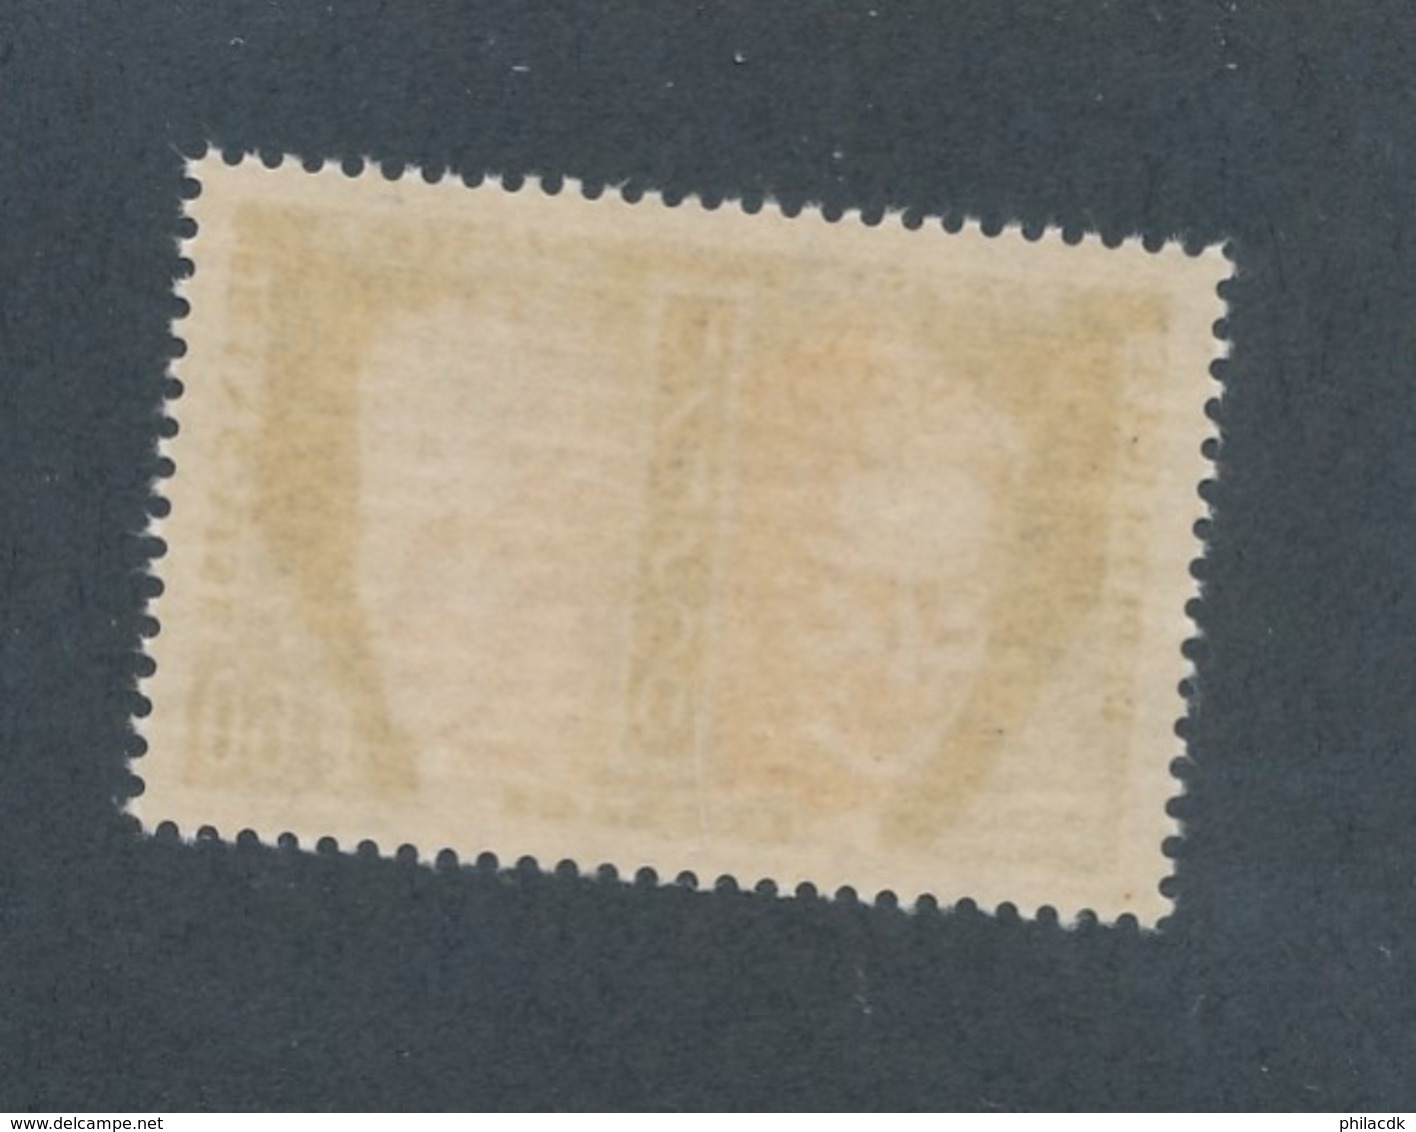 FRANCE - SERVICE N°YT 26 NEUF** SANS CHARNIERE - COTE YT : 1€50 - 1960/65 - Mint/Hinged